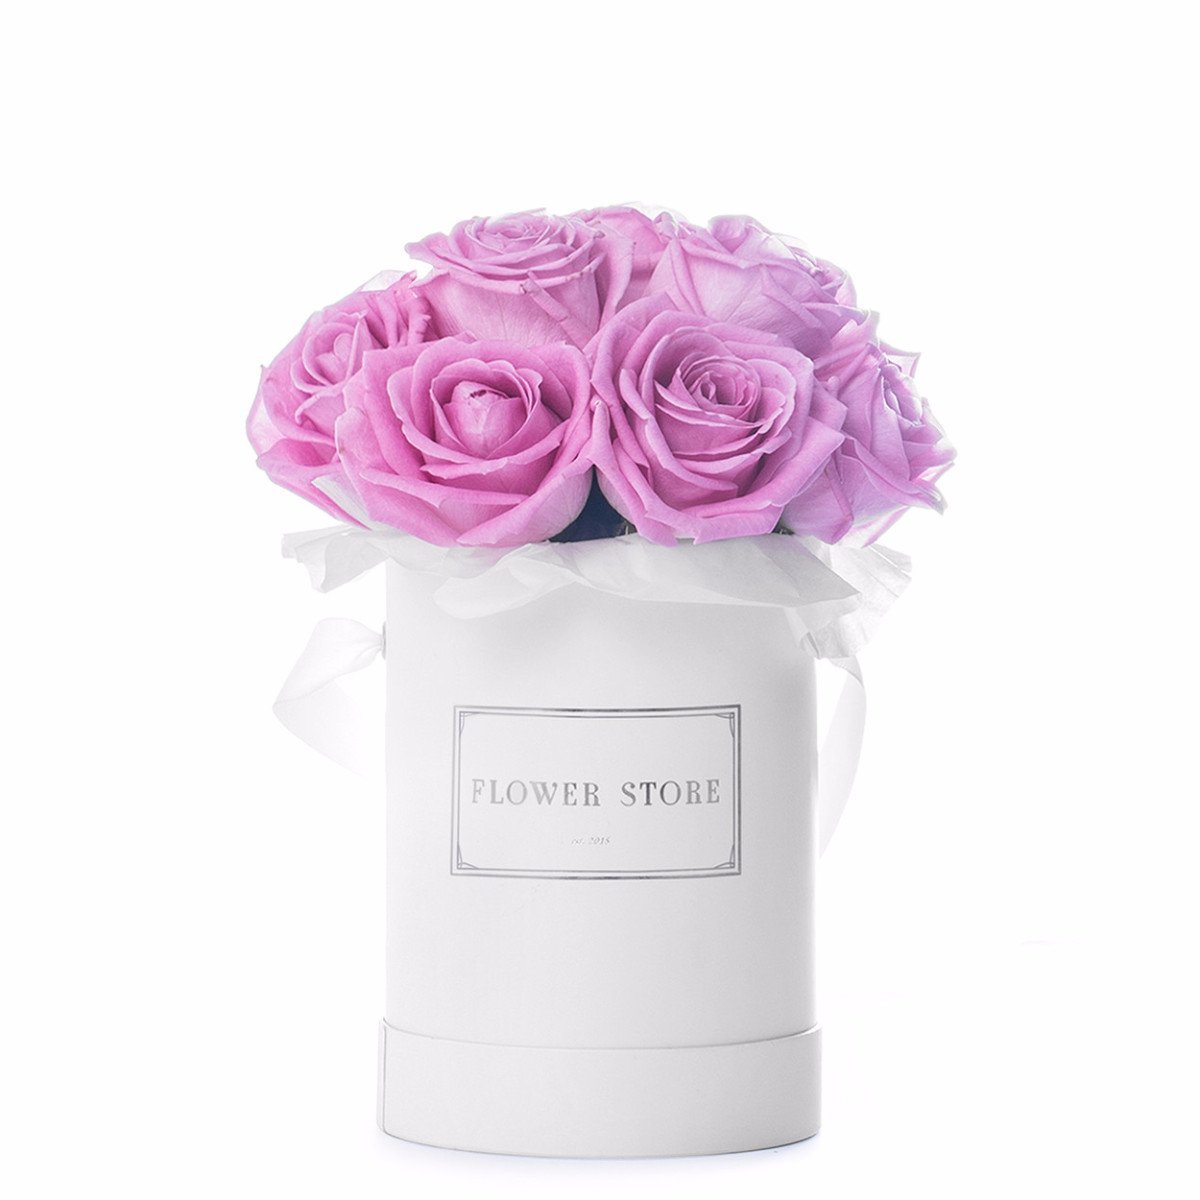 Small white box with pink roses - vivid flowers